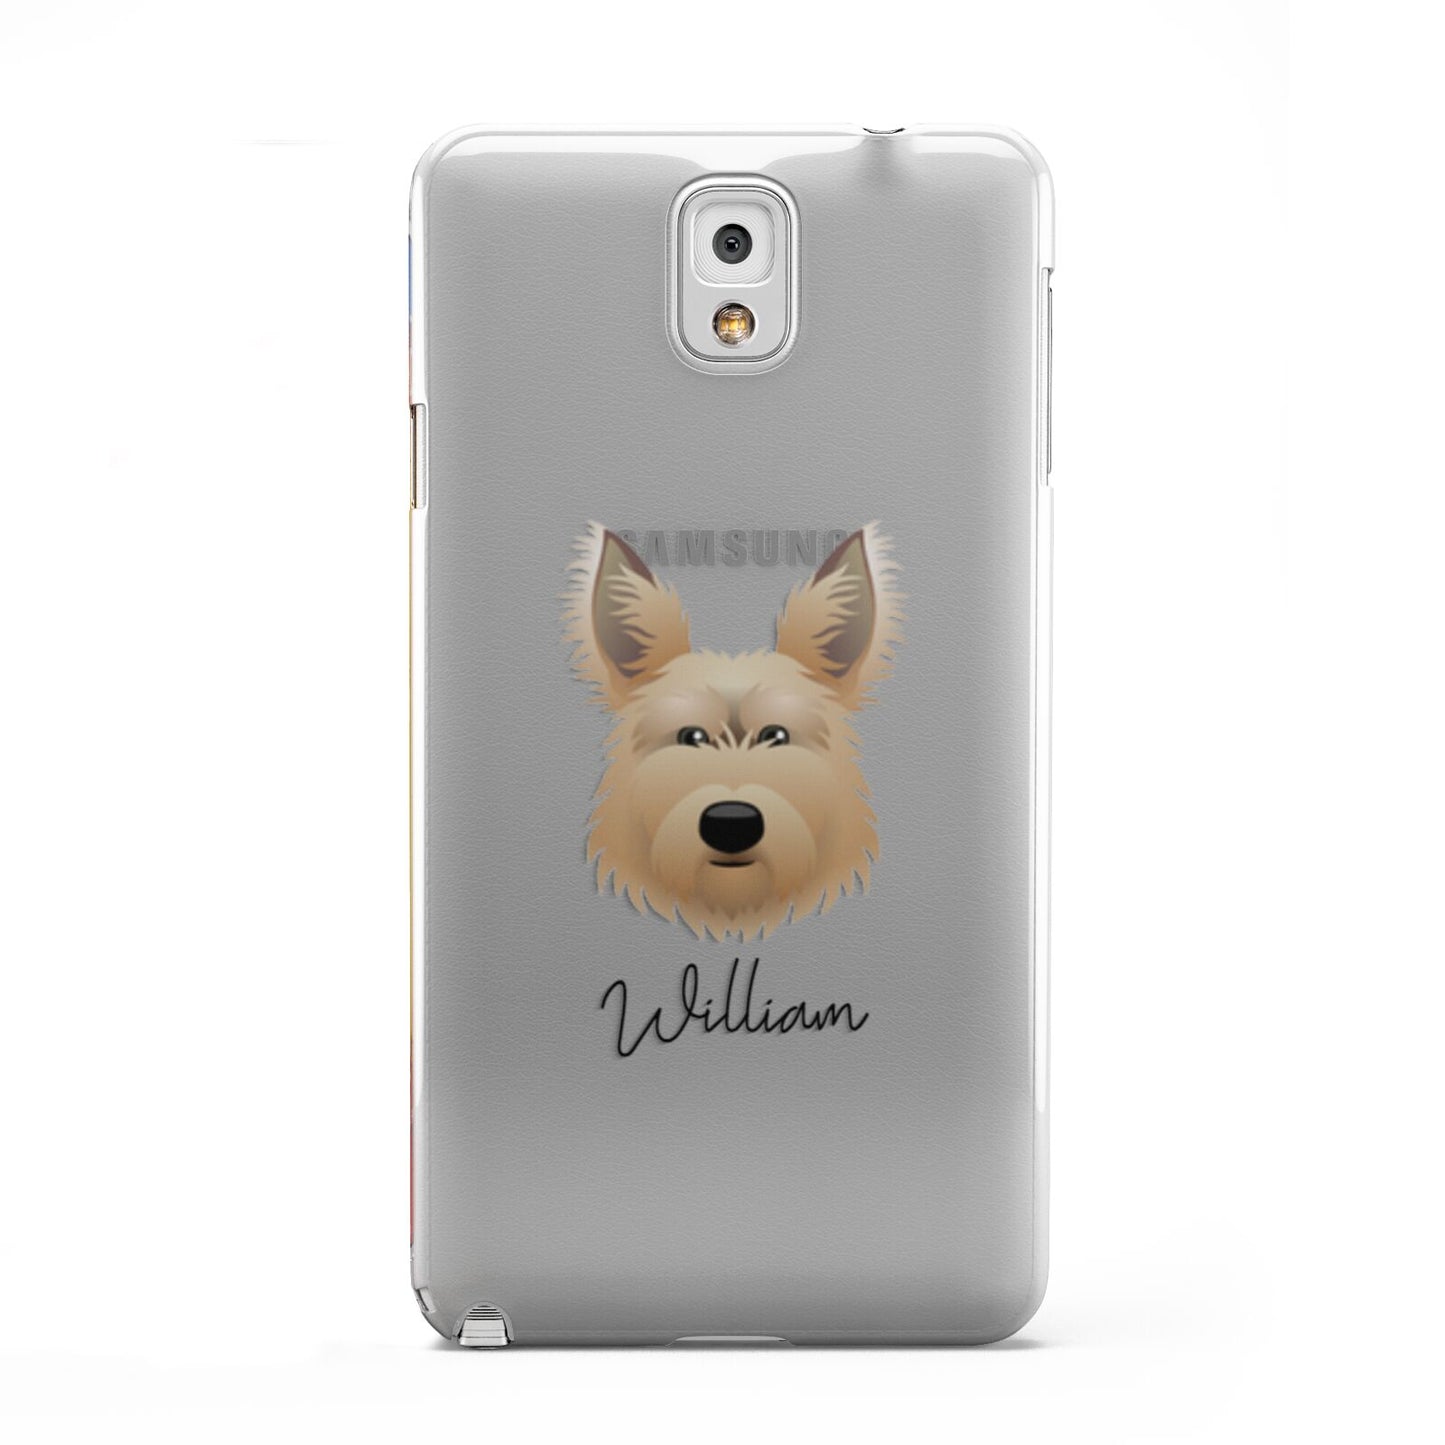 Picardy Sheepdog Personalised Samsung Galaxy Note 3 Case